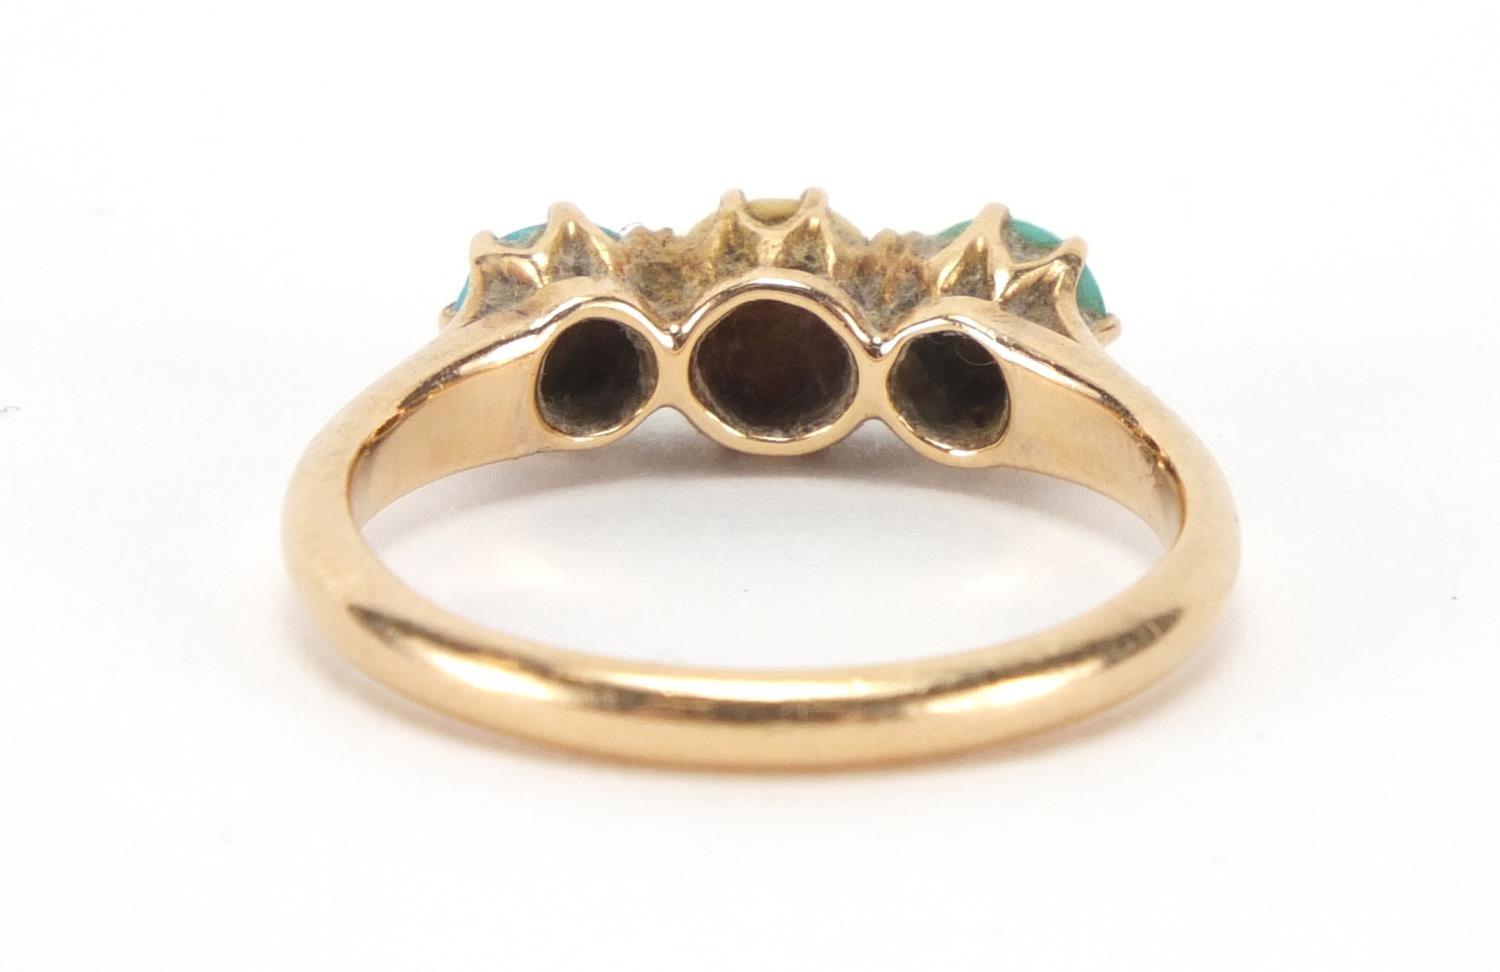 18ct gold pearl and turquoise ring, size M, approximate weight 3.3g : For Extra Condition Reports - Image 5 of 6